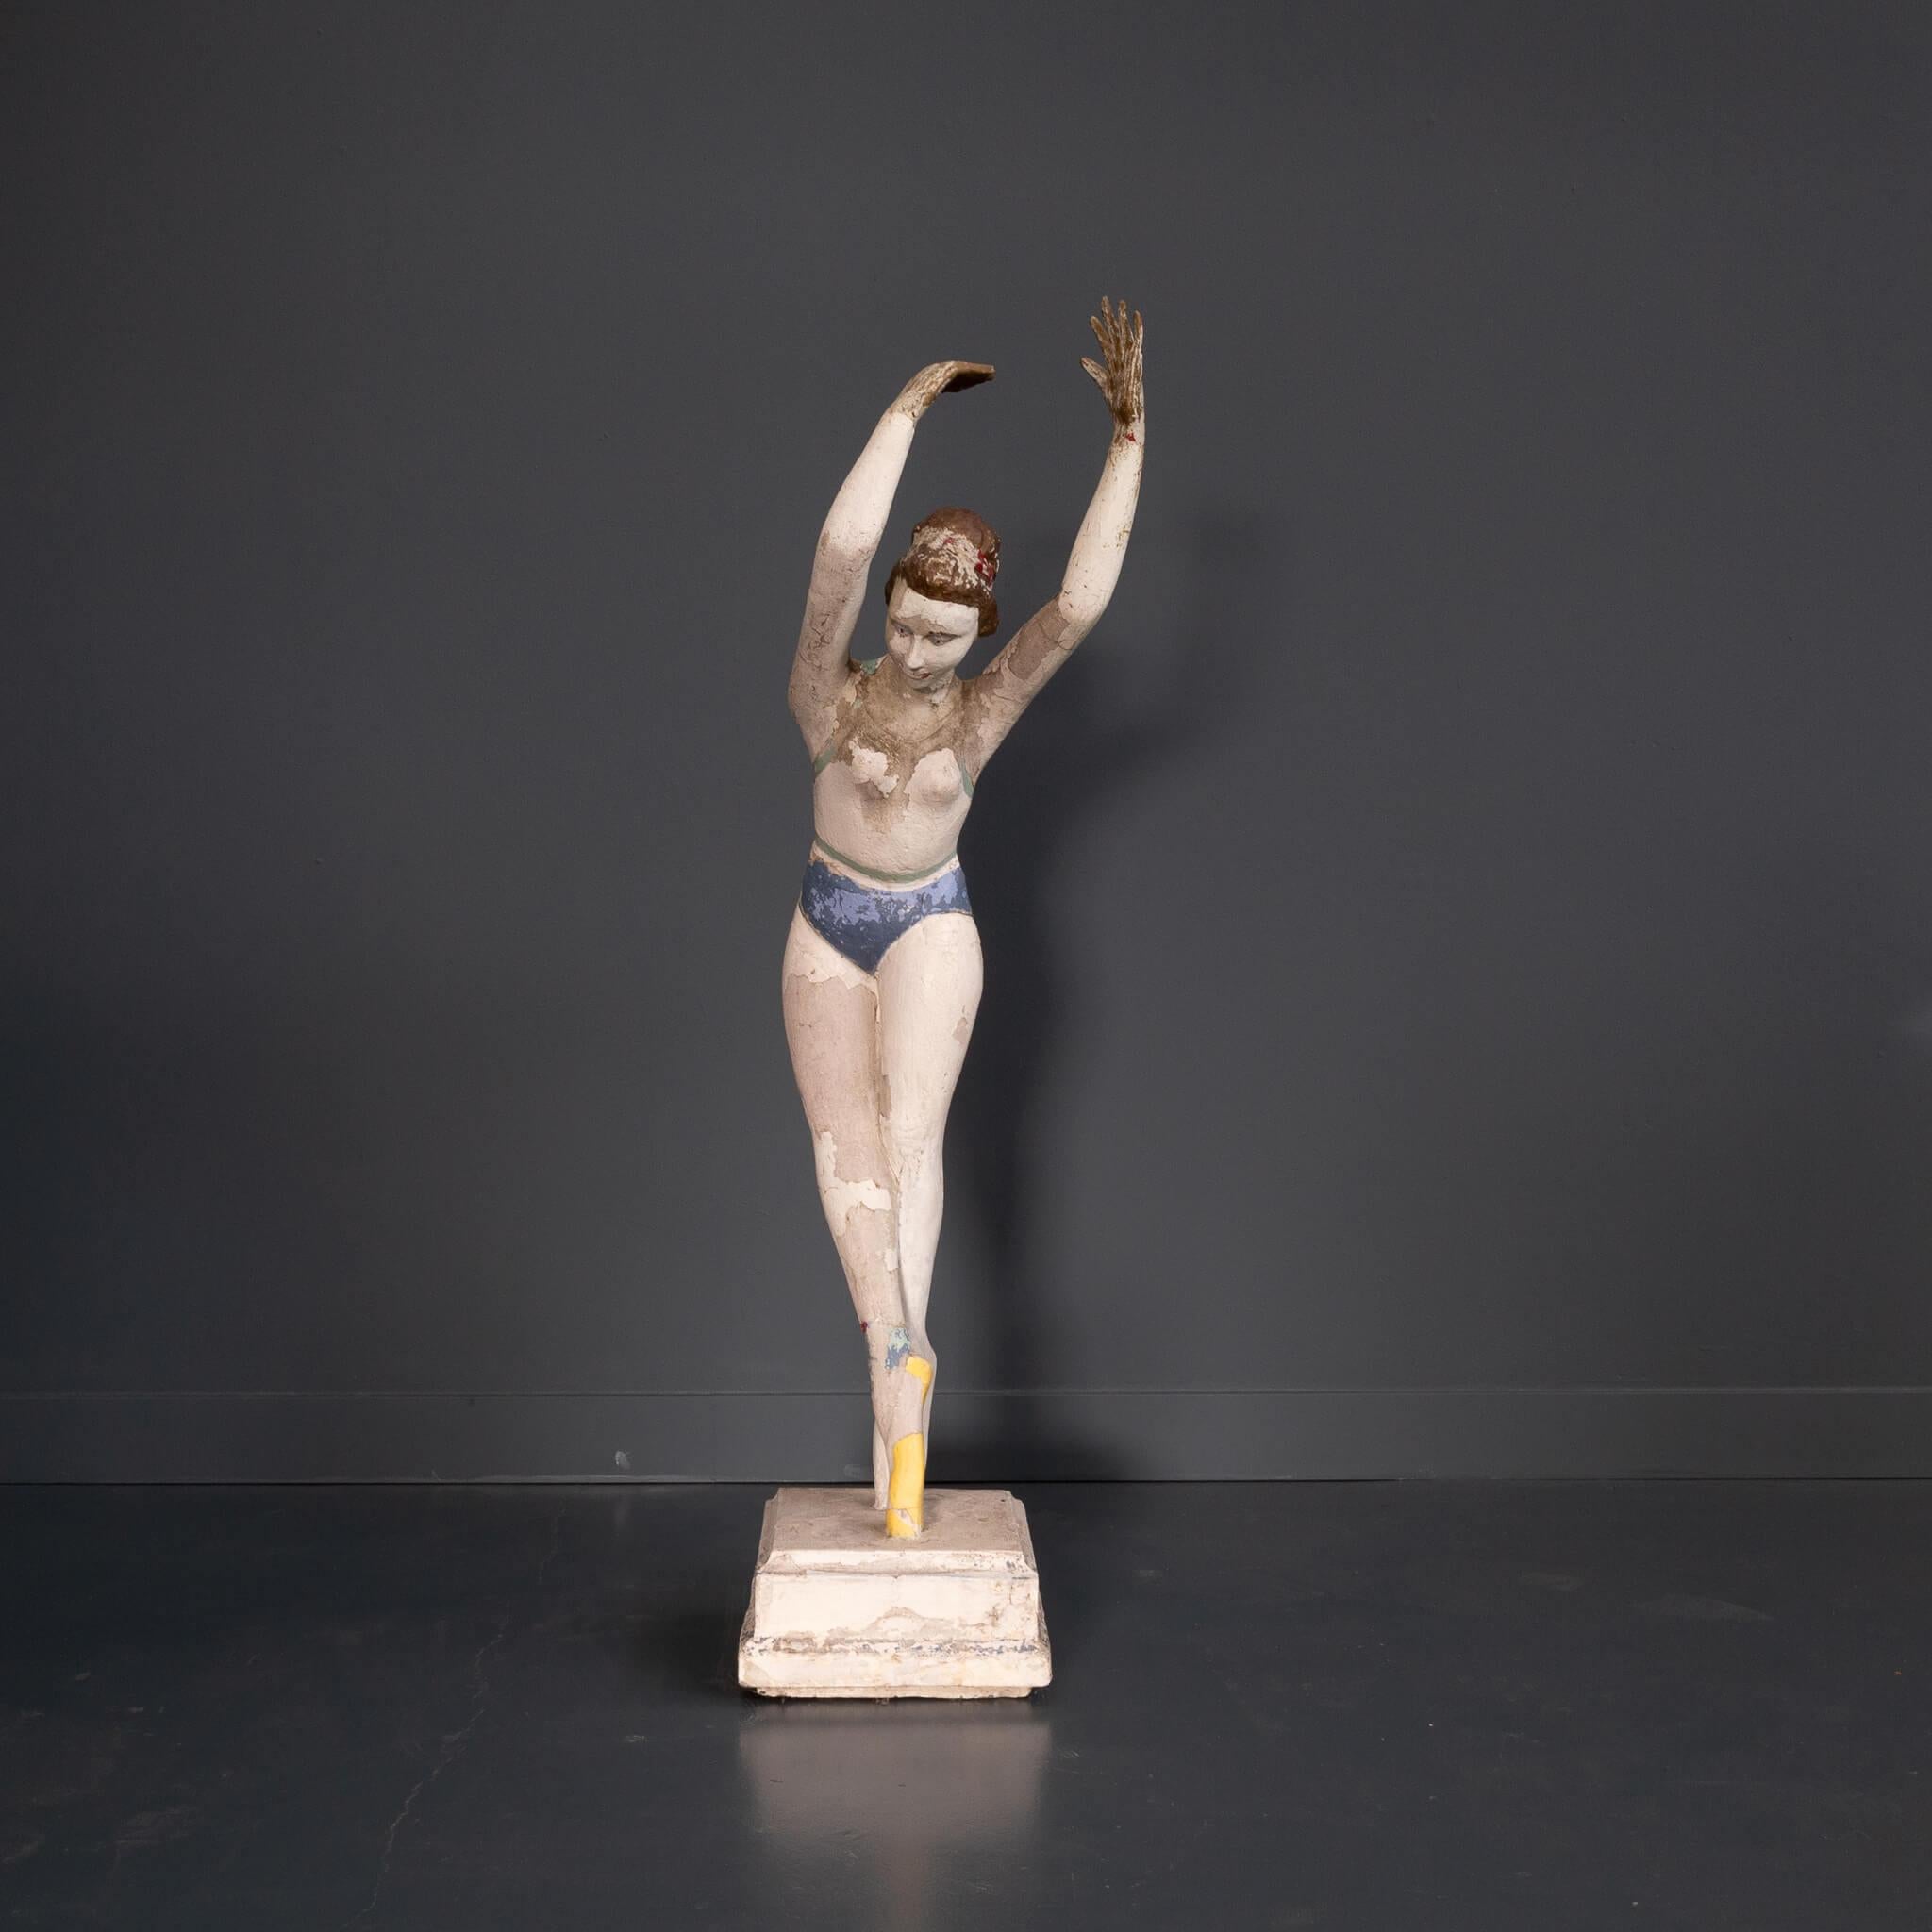 Beautiful statue made of concrete, cement. This image evokes an enormous contradiction. The dance of a ballerina is always very smooth due to the flexibility of the athletic ballerina. The contrast is in the material used, concrete rigid and hard,